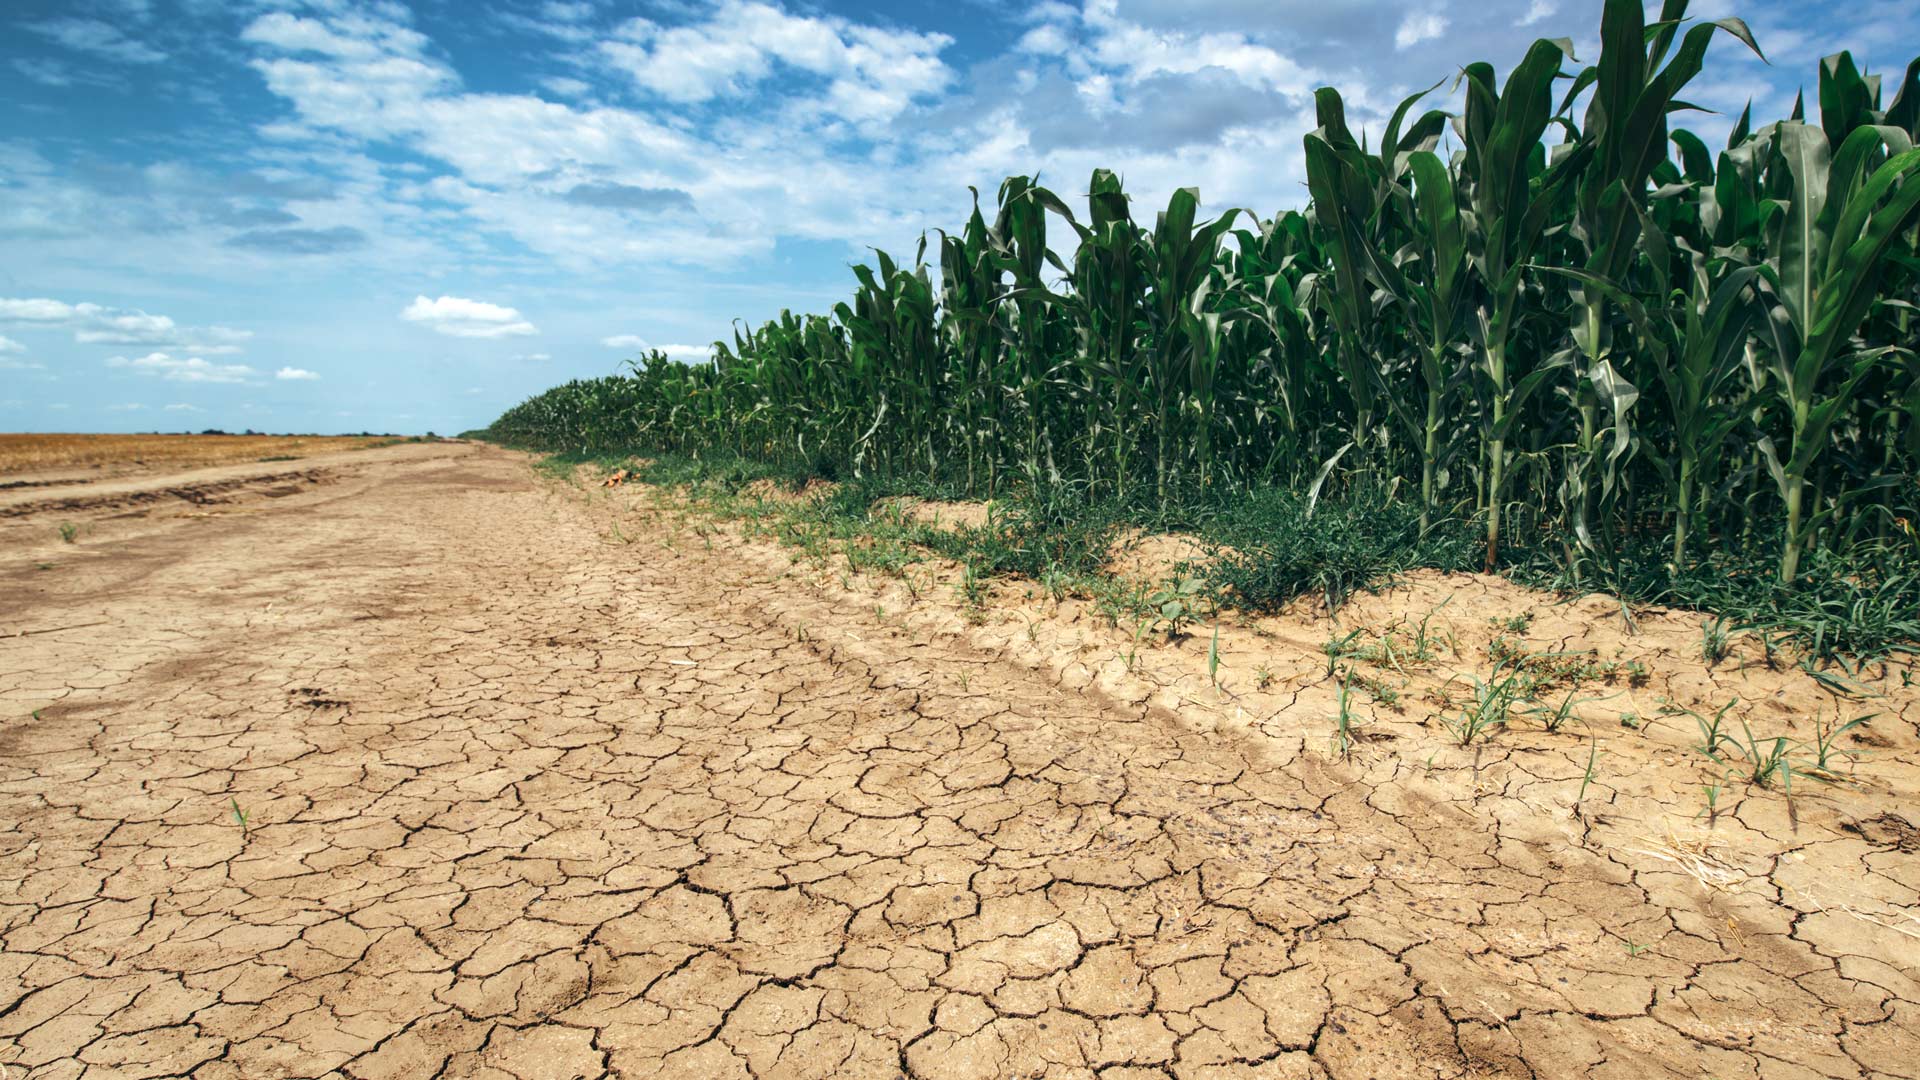 Drought conditions are shown in dry soil next to a cornfield.